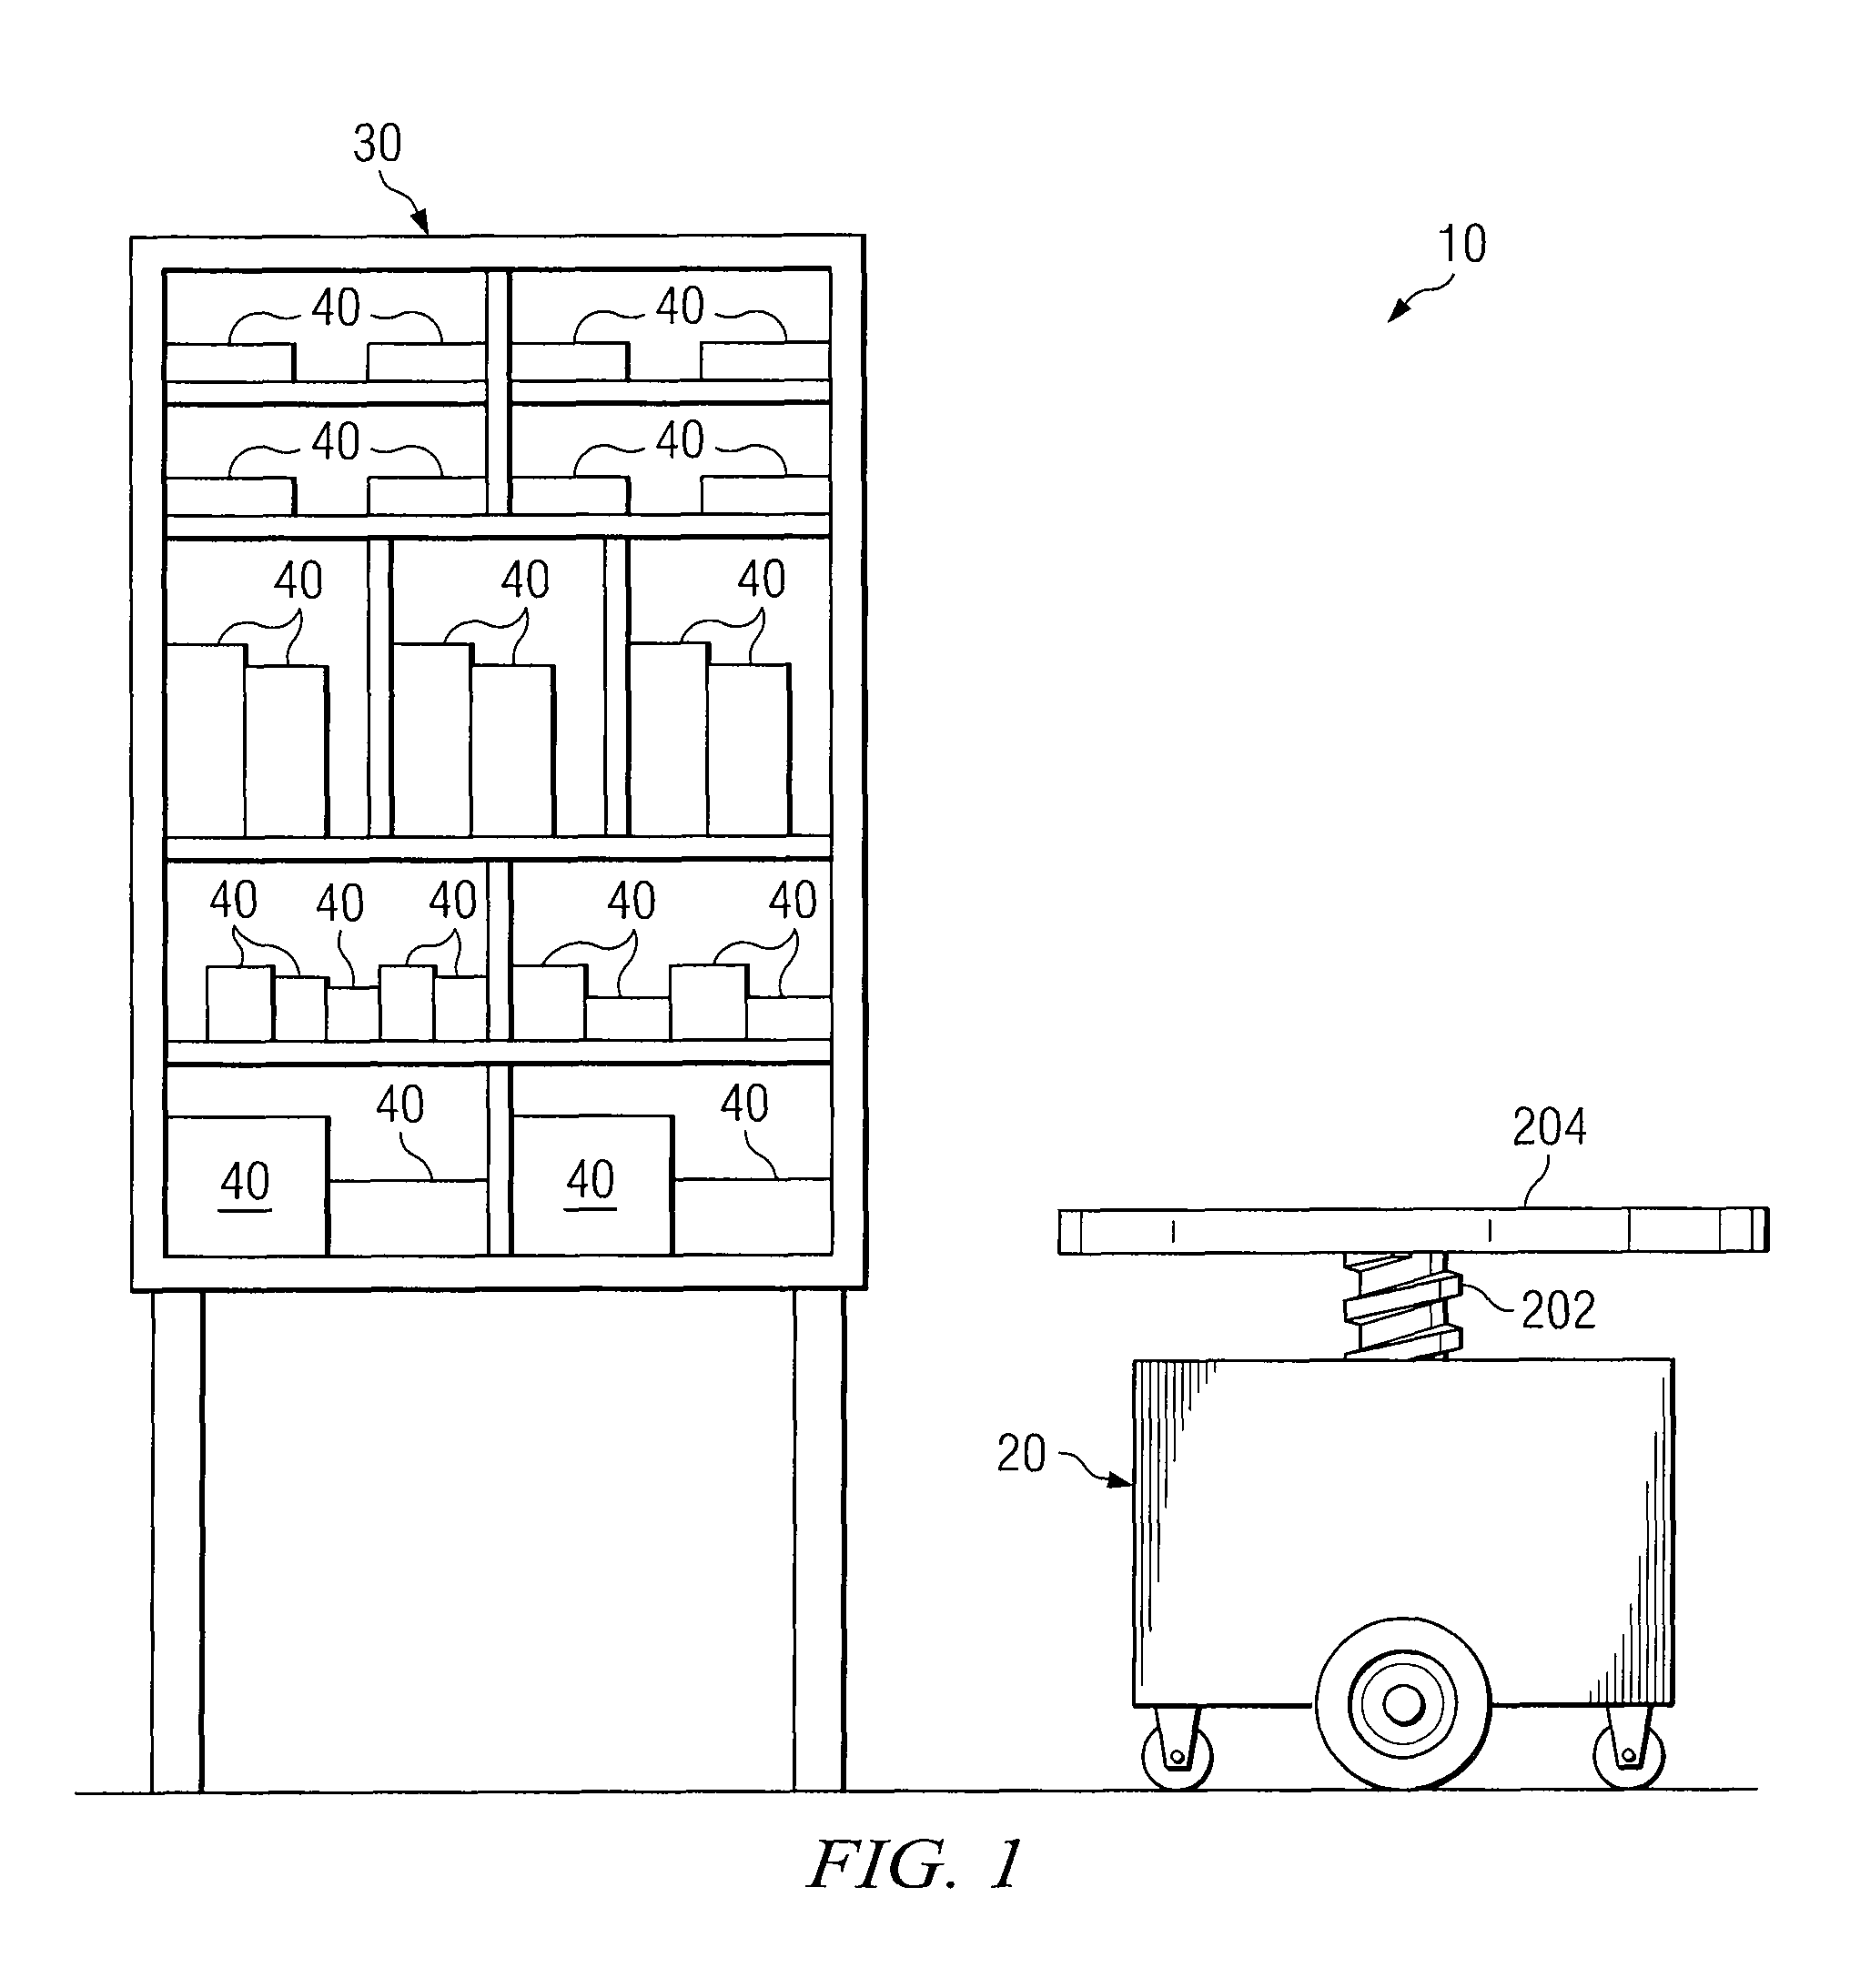 System and method for transporting inventory items